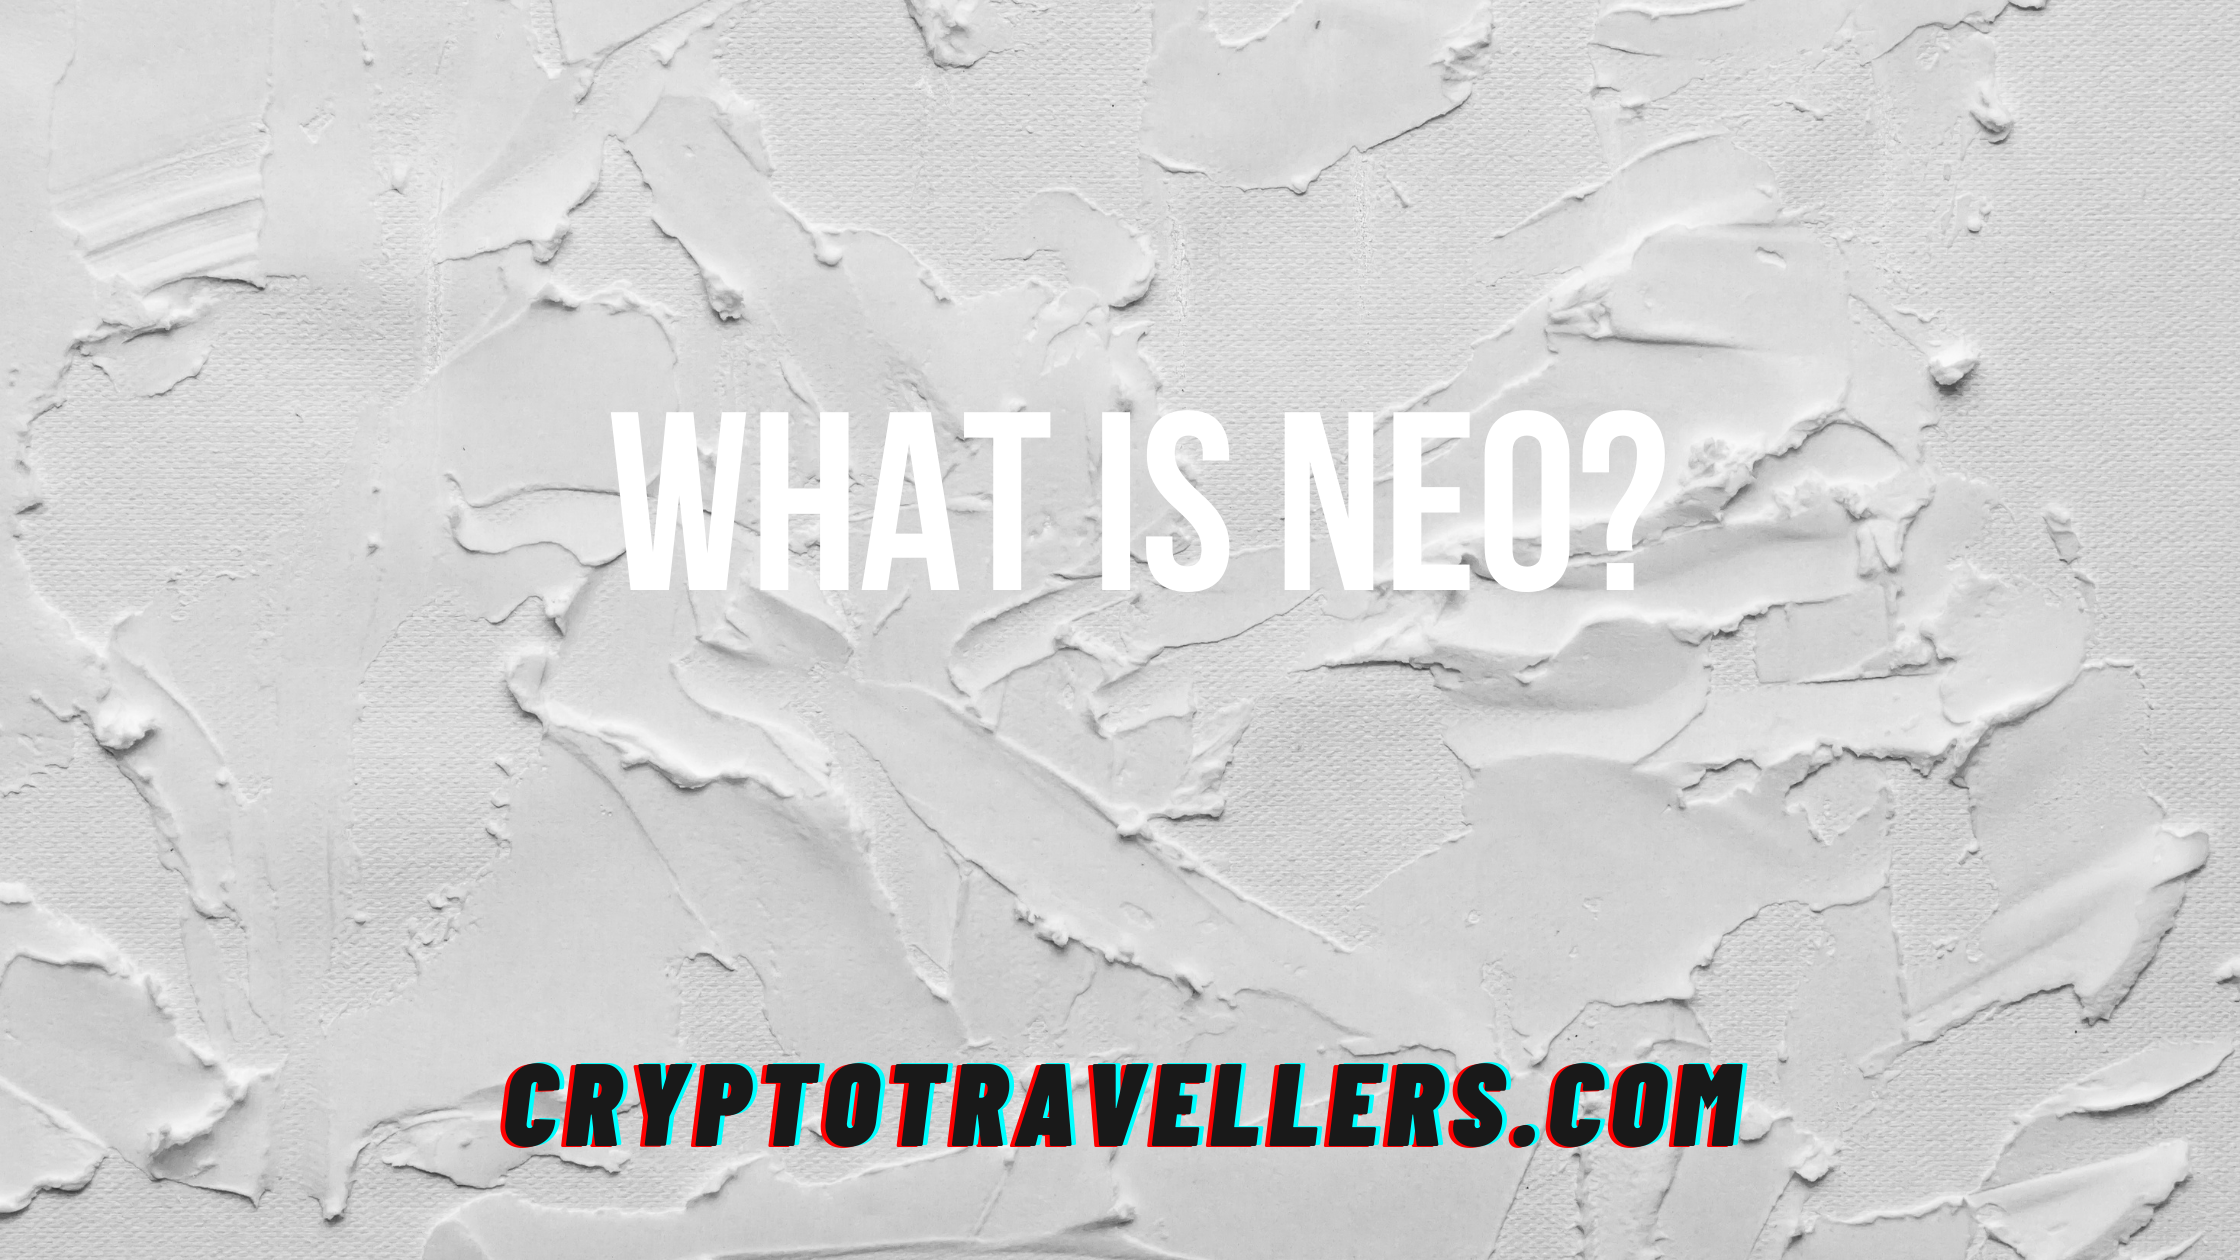 What is NEO?